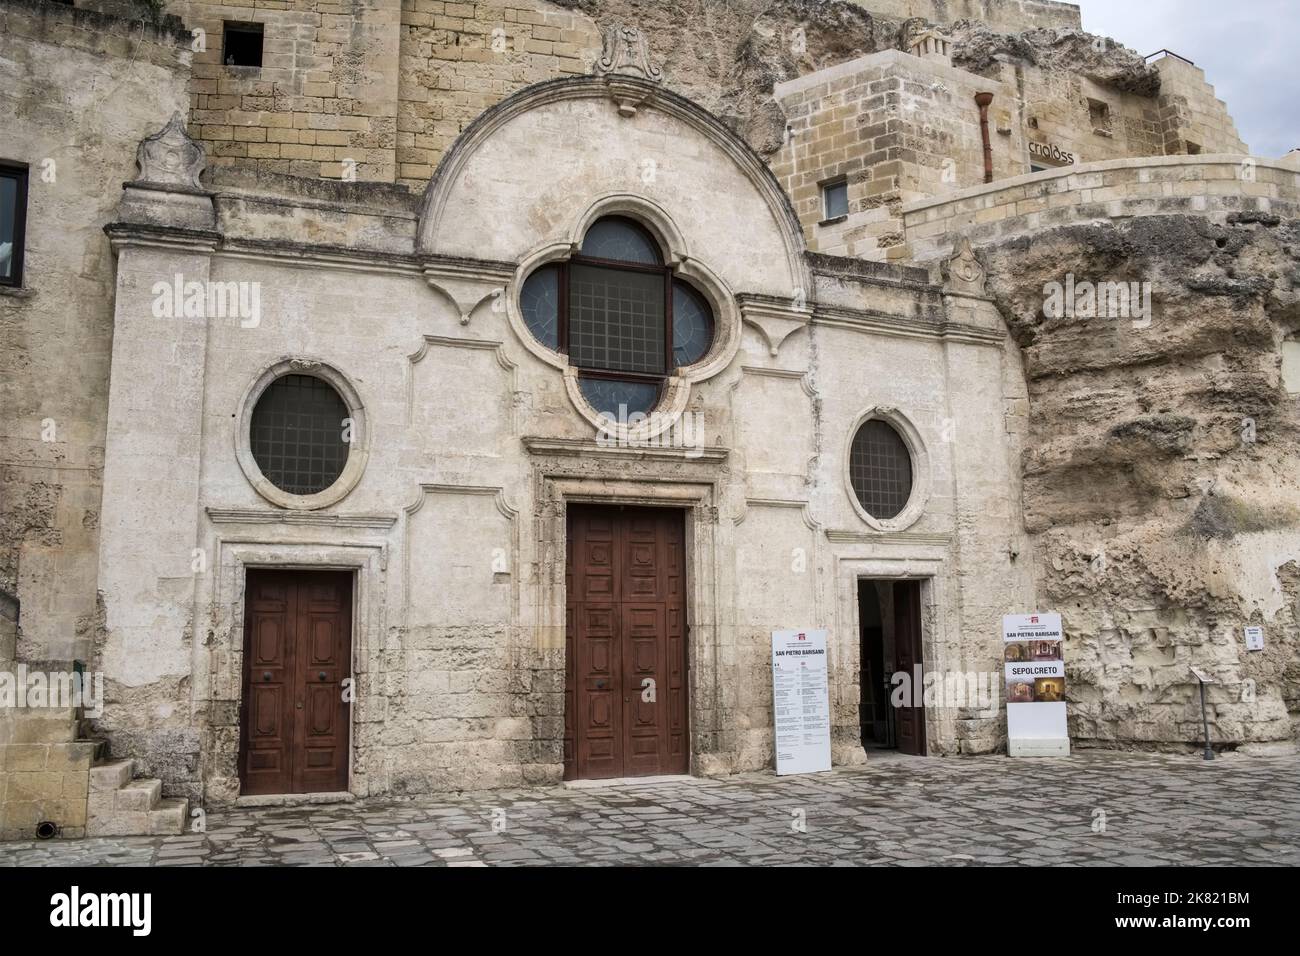 Italy, Basilicata region: Matera. Rupestrian Church of San Pietro Barisano (St. Peter’s Church); The town is registered as a UNESCO World Heritage Sit Stock Photo